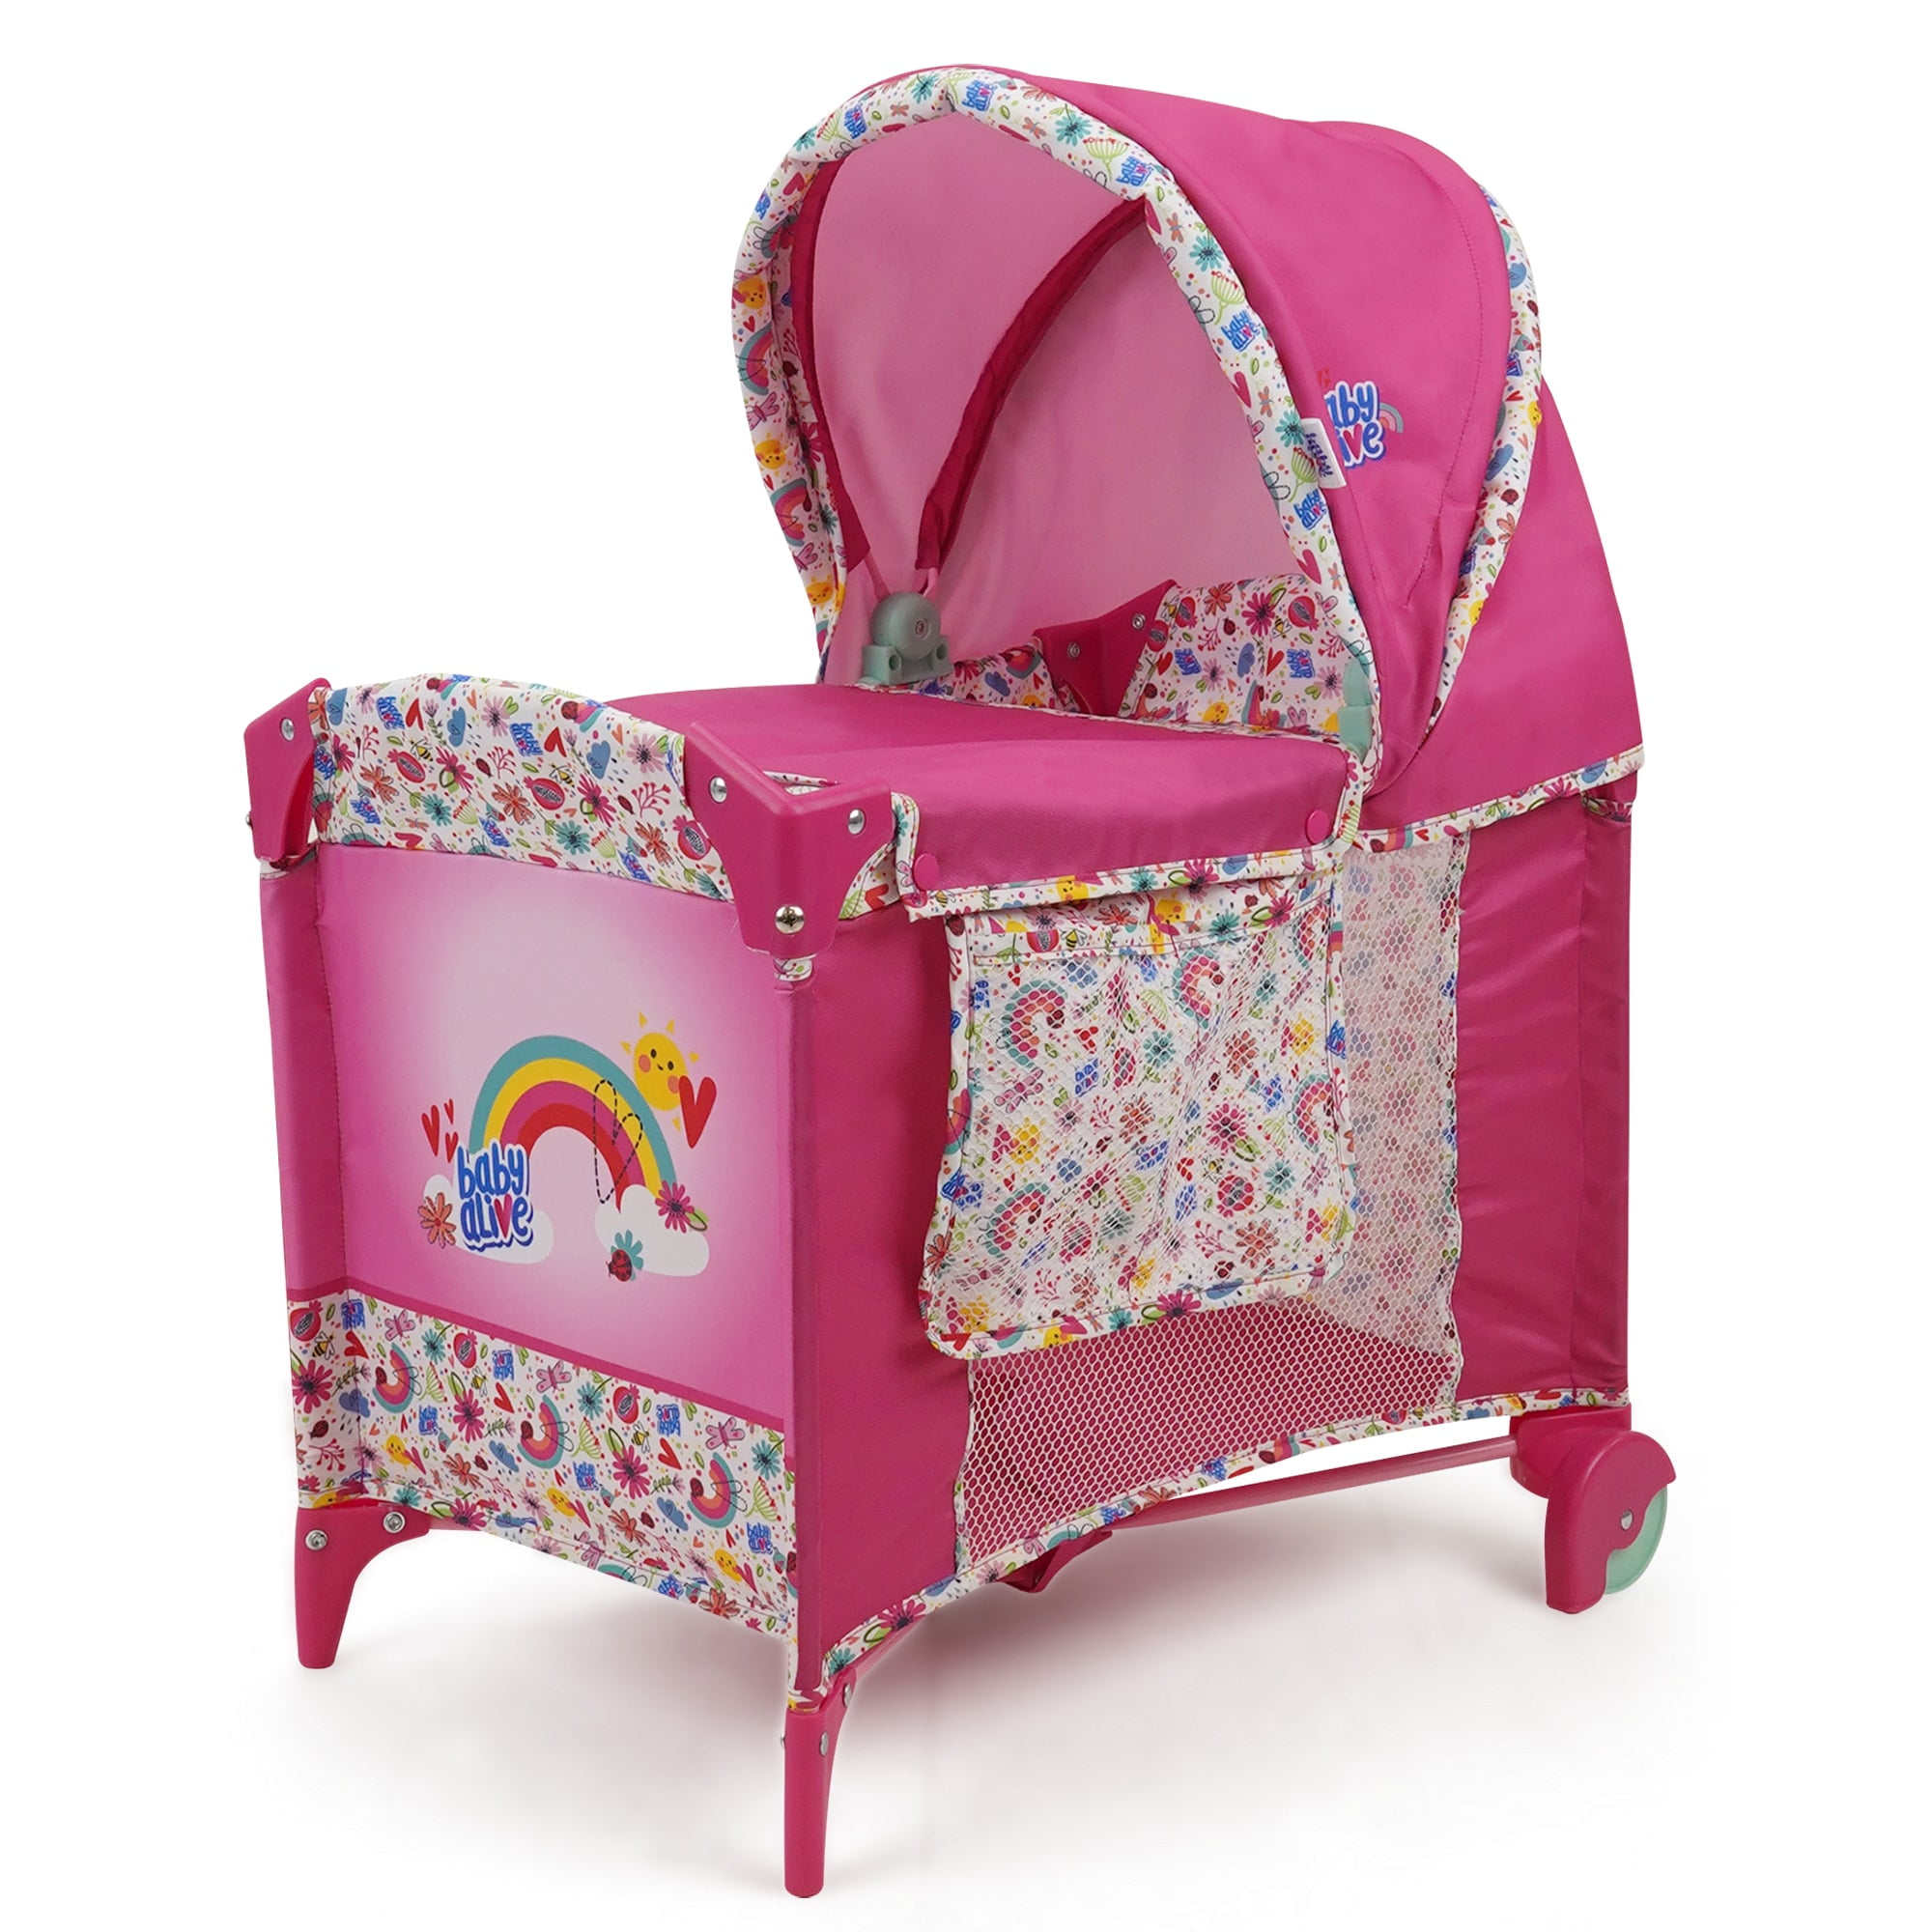 Baby Alive Pink Rainbow Deluxe Doll Play Yard - Multi